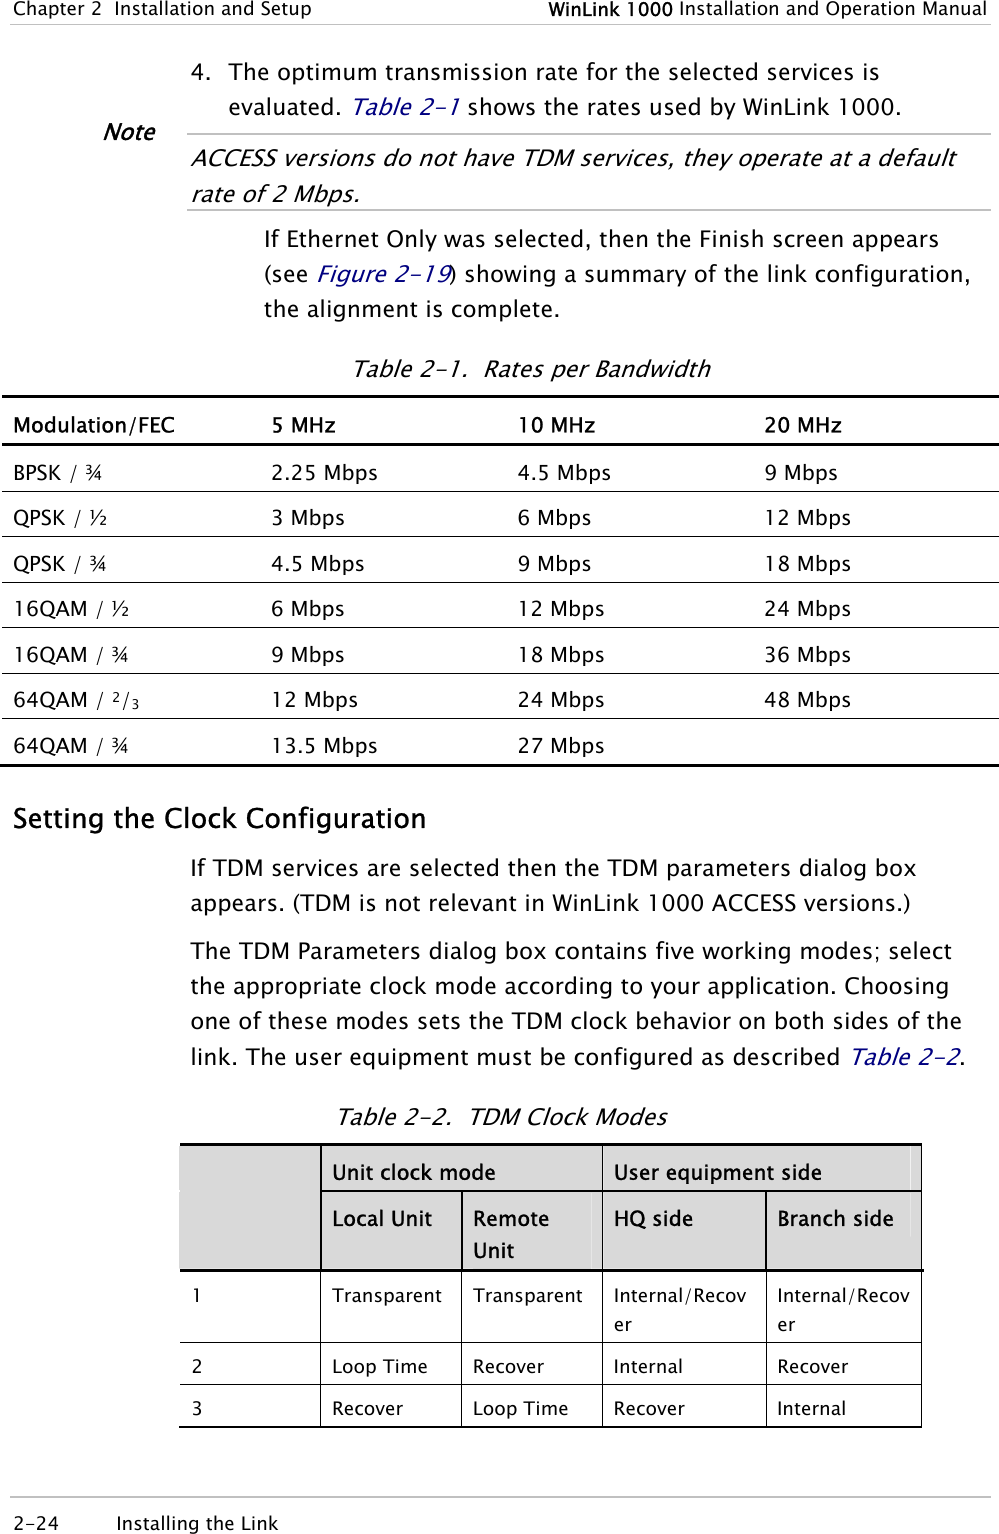 Chapter  2  Installation and Setup  WinLink 1000 Installation and Operation Manual 4. The optimum transmission rate for the selected services is evaluated. Table  2-1 shows the rates used by WinLink 1000.  ACCESS versions do not have TDM services, they operate at a default rate of 2 Mbps.  If Ethernet Only was selected, then the Finish screen appears  (see Figure  2-19) showing a summary of the link configuration, the alignment is complete. Table  2-1.  Rates per Bandwidth Modulation/FEC  5 MHz  10 MHz  20 MHz BPSK / ¾  2.25 Mbps  4.5 Mbps  9 Mbps QPSK / ½   3 Mbps  6 Mbps  12 Mbps QPSK / ¾   4.5 Mbps  9 Mbps  18 Mbps 16QAM / ½   6 Mbps  12 Mbps  24 Mbps 16QAM / ¾   9 Mbps  18 Mbps  36 Mbps 64QAM / 2/3   12 Mbps  24 Mbps  48 Mbps 64QAM / ¾   13.5 Mbps  27 Mbps   Setting the Clock Configuration If TDM services are selected then the TDM parameters dialog box appears. (TDM is not relevant in WinLink 1000 ACCESS versions.) The TDM Parameters dialog box contains five working modes; select the appropriate clock mode according to your application. Choosing one of these modes sets the TDM clock behavior on both sides of the link. The user equipment must be configured as described Table  2-2. Table  2-2.  TDM Clock Modes  Unit clock mode  User equipment side  Local Unit  Remote Unit HQ side  Branch side 1  Transparent Transparent Internal/Recover Internal/Recover 2 Loop Time Recover Internal Recover 3 Recover Loop Time Recover Internal Note 2-24 Installing the Link   